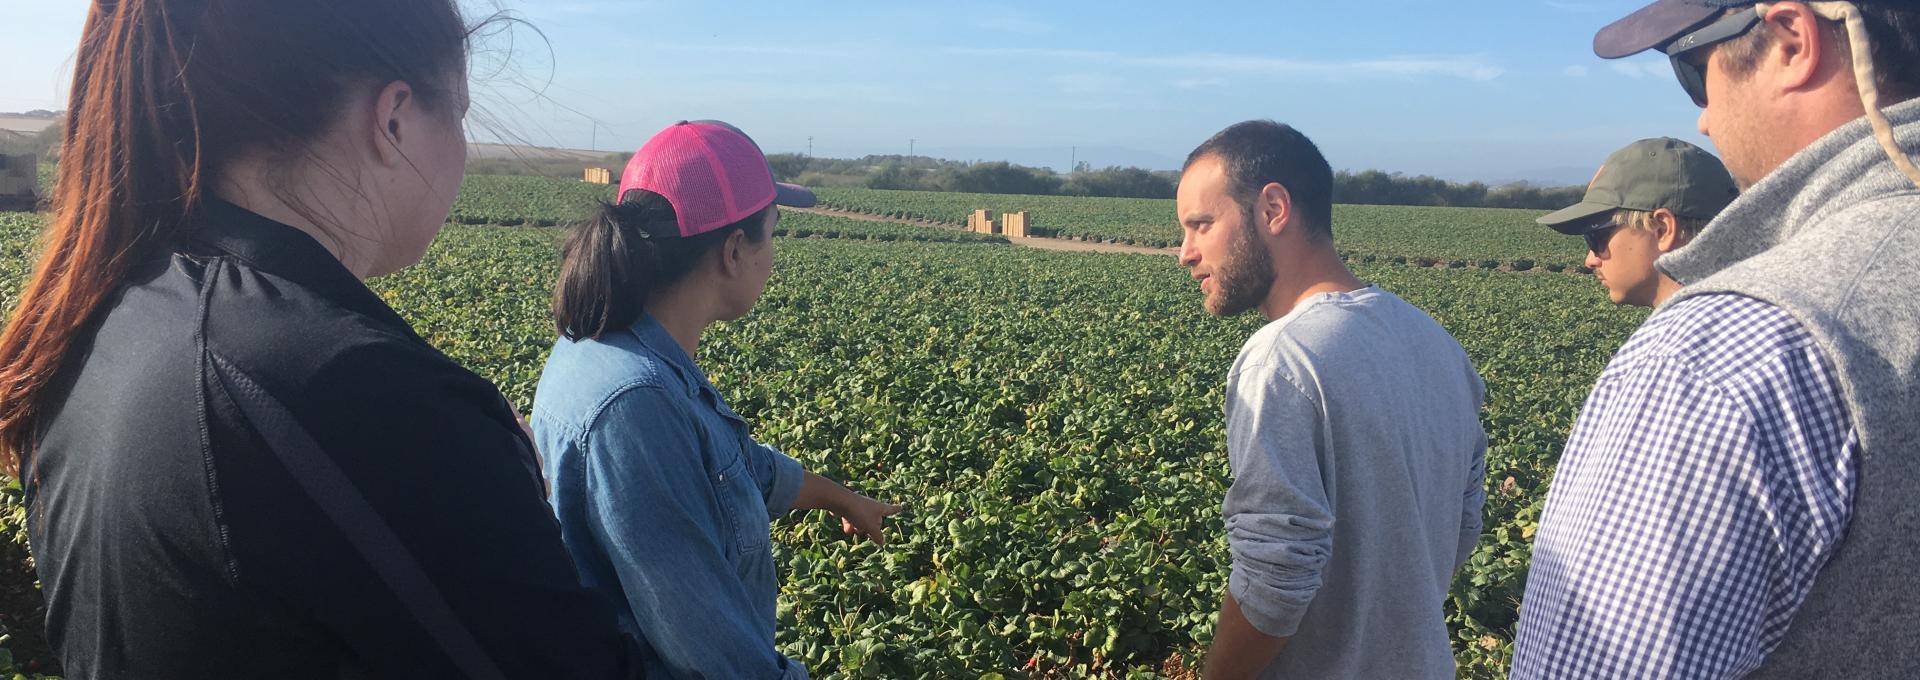 Agriculture students visit crops in field